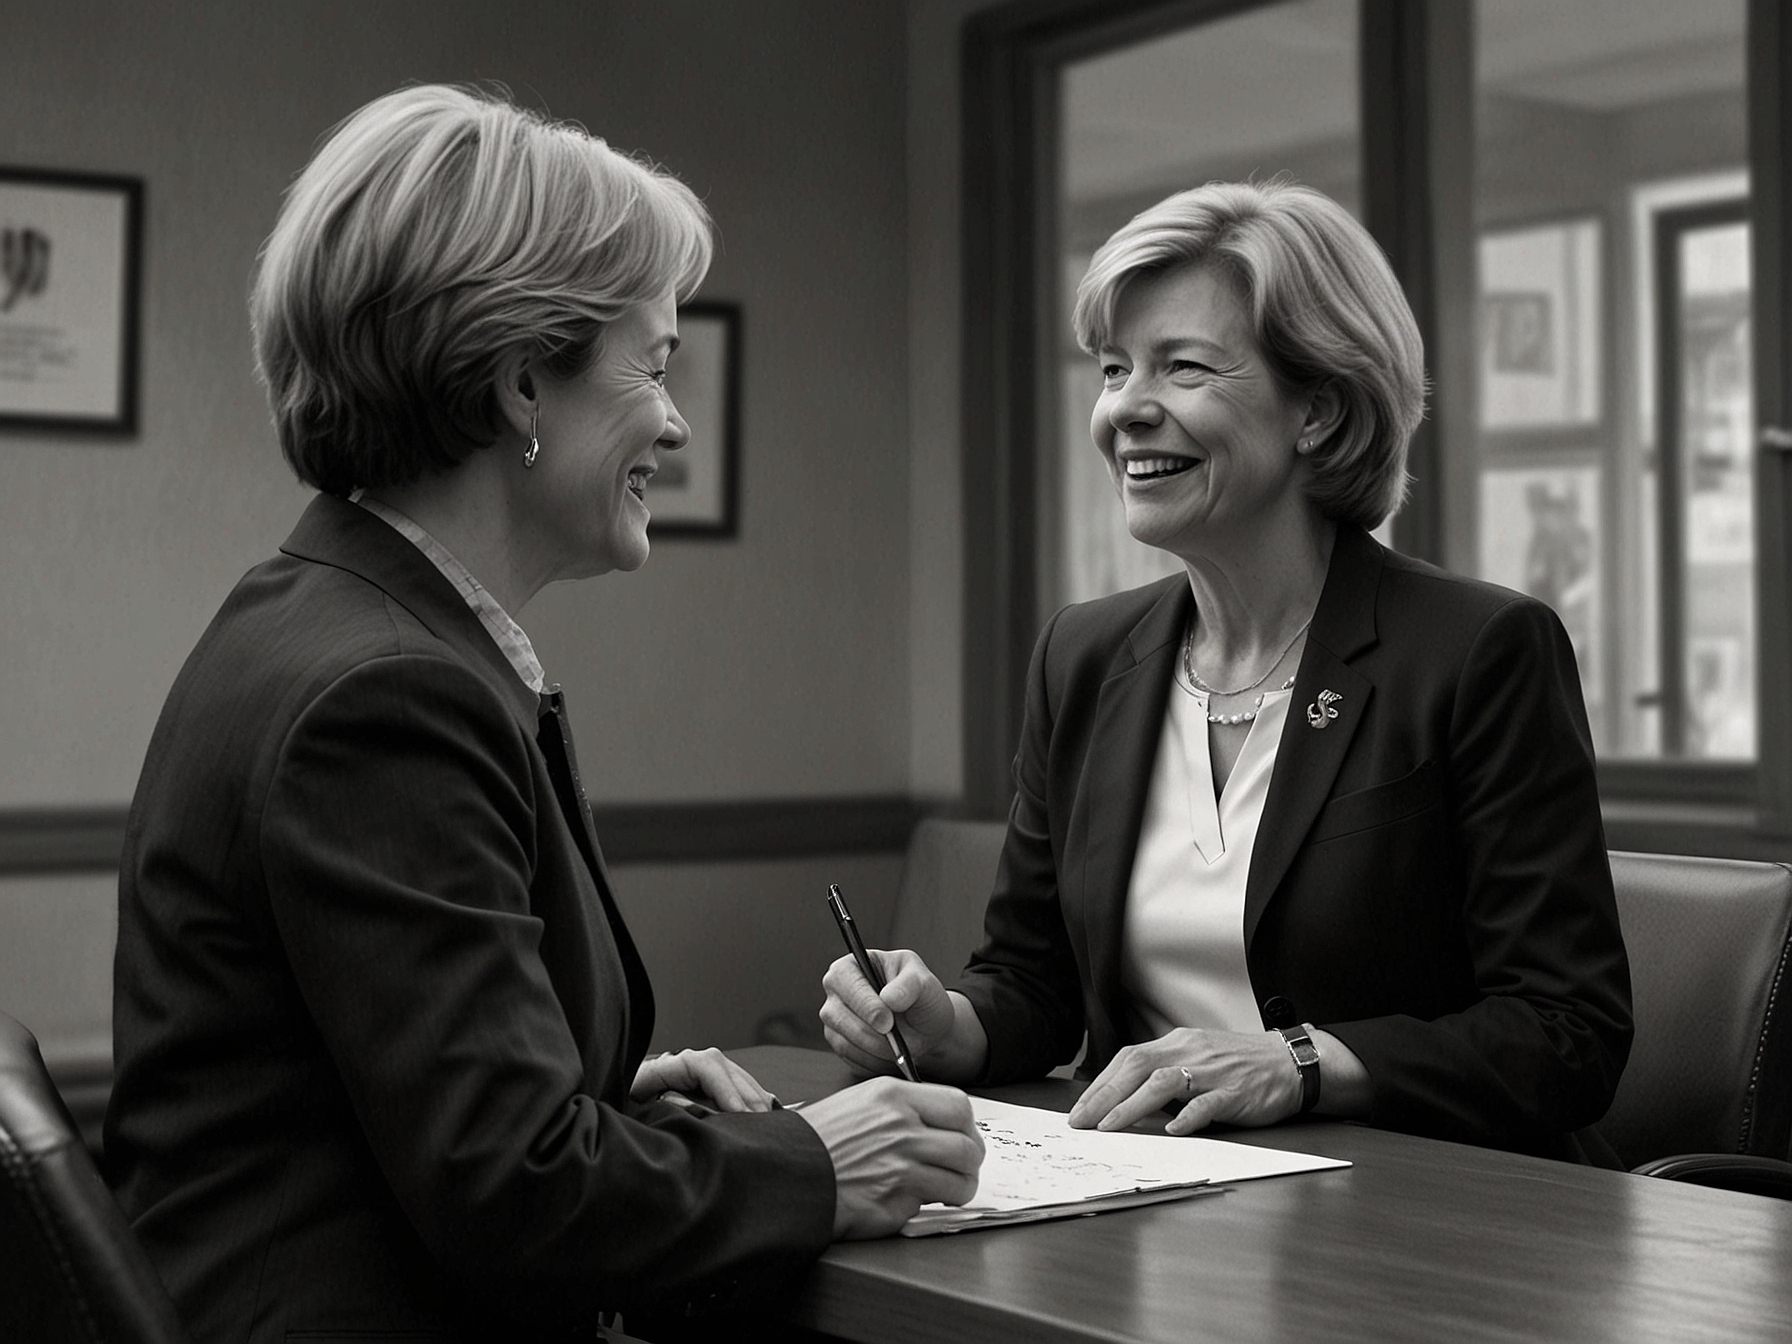 Senator Tammy Baldwin speaks with a healthcare provider during her state tour in Wisconsin, addressing local healthcare concerns and discussing community needs for better medical services.